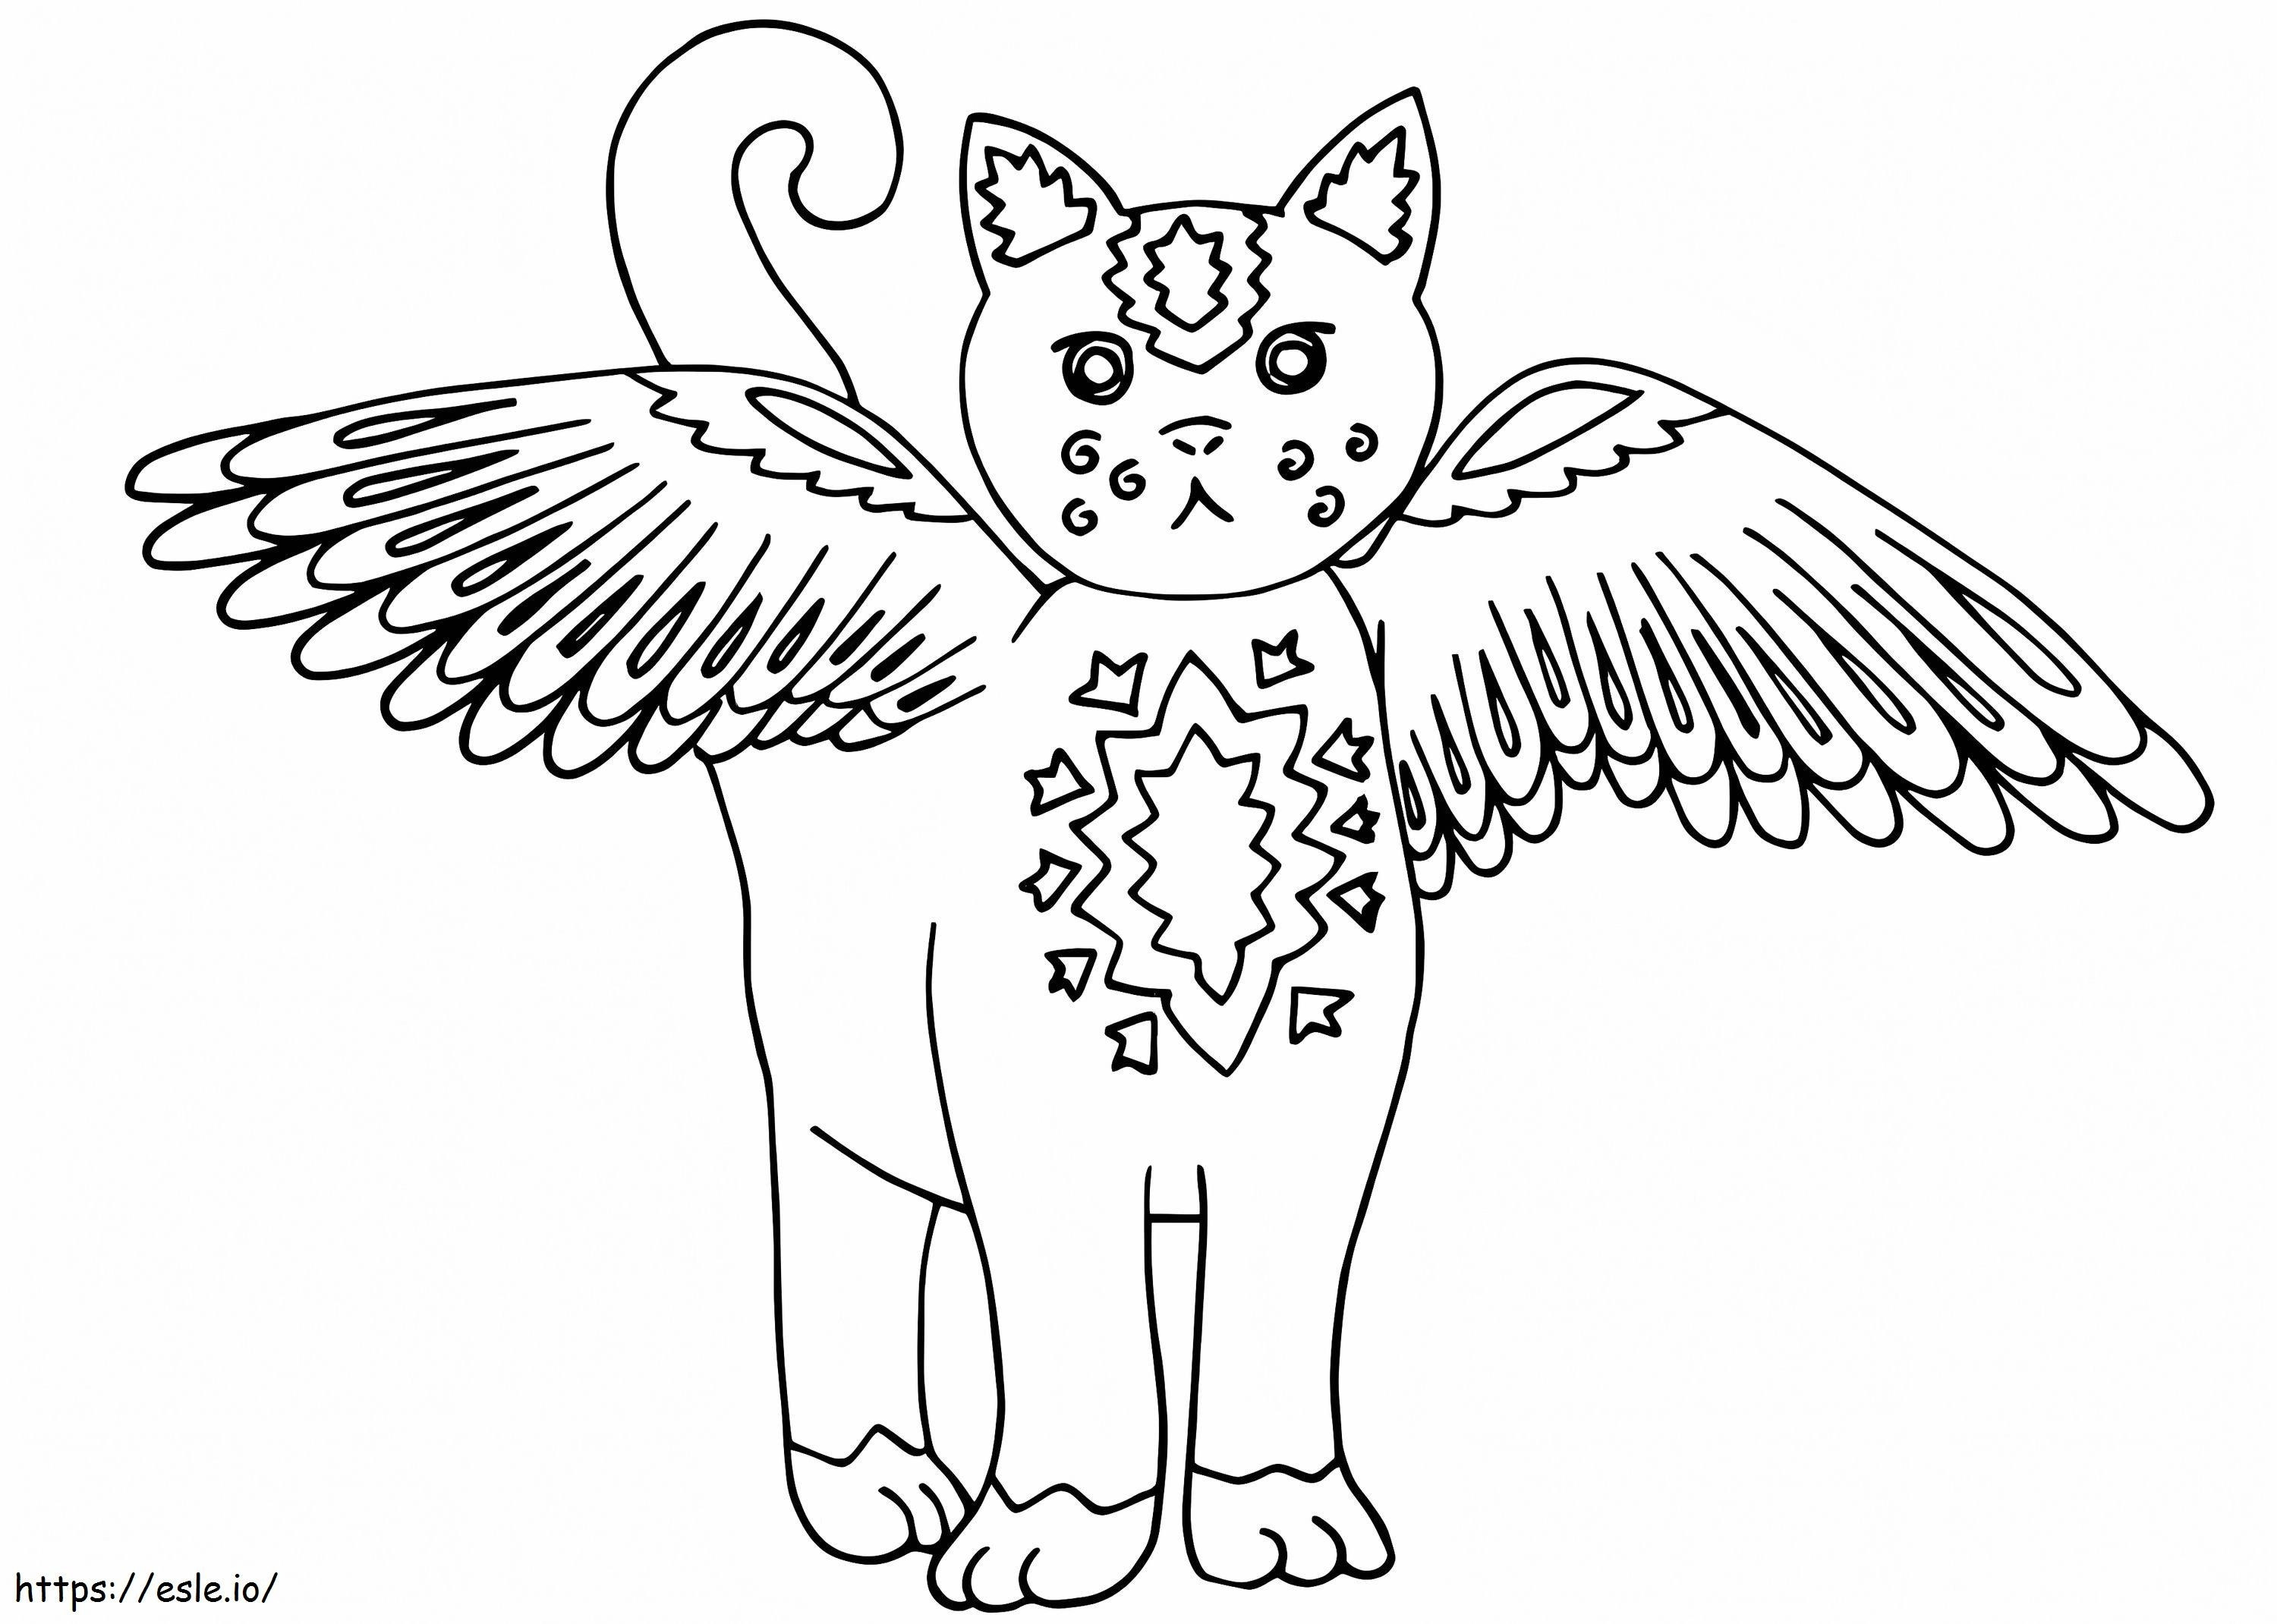 Cat With Wings Alebrijes coloring page